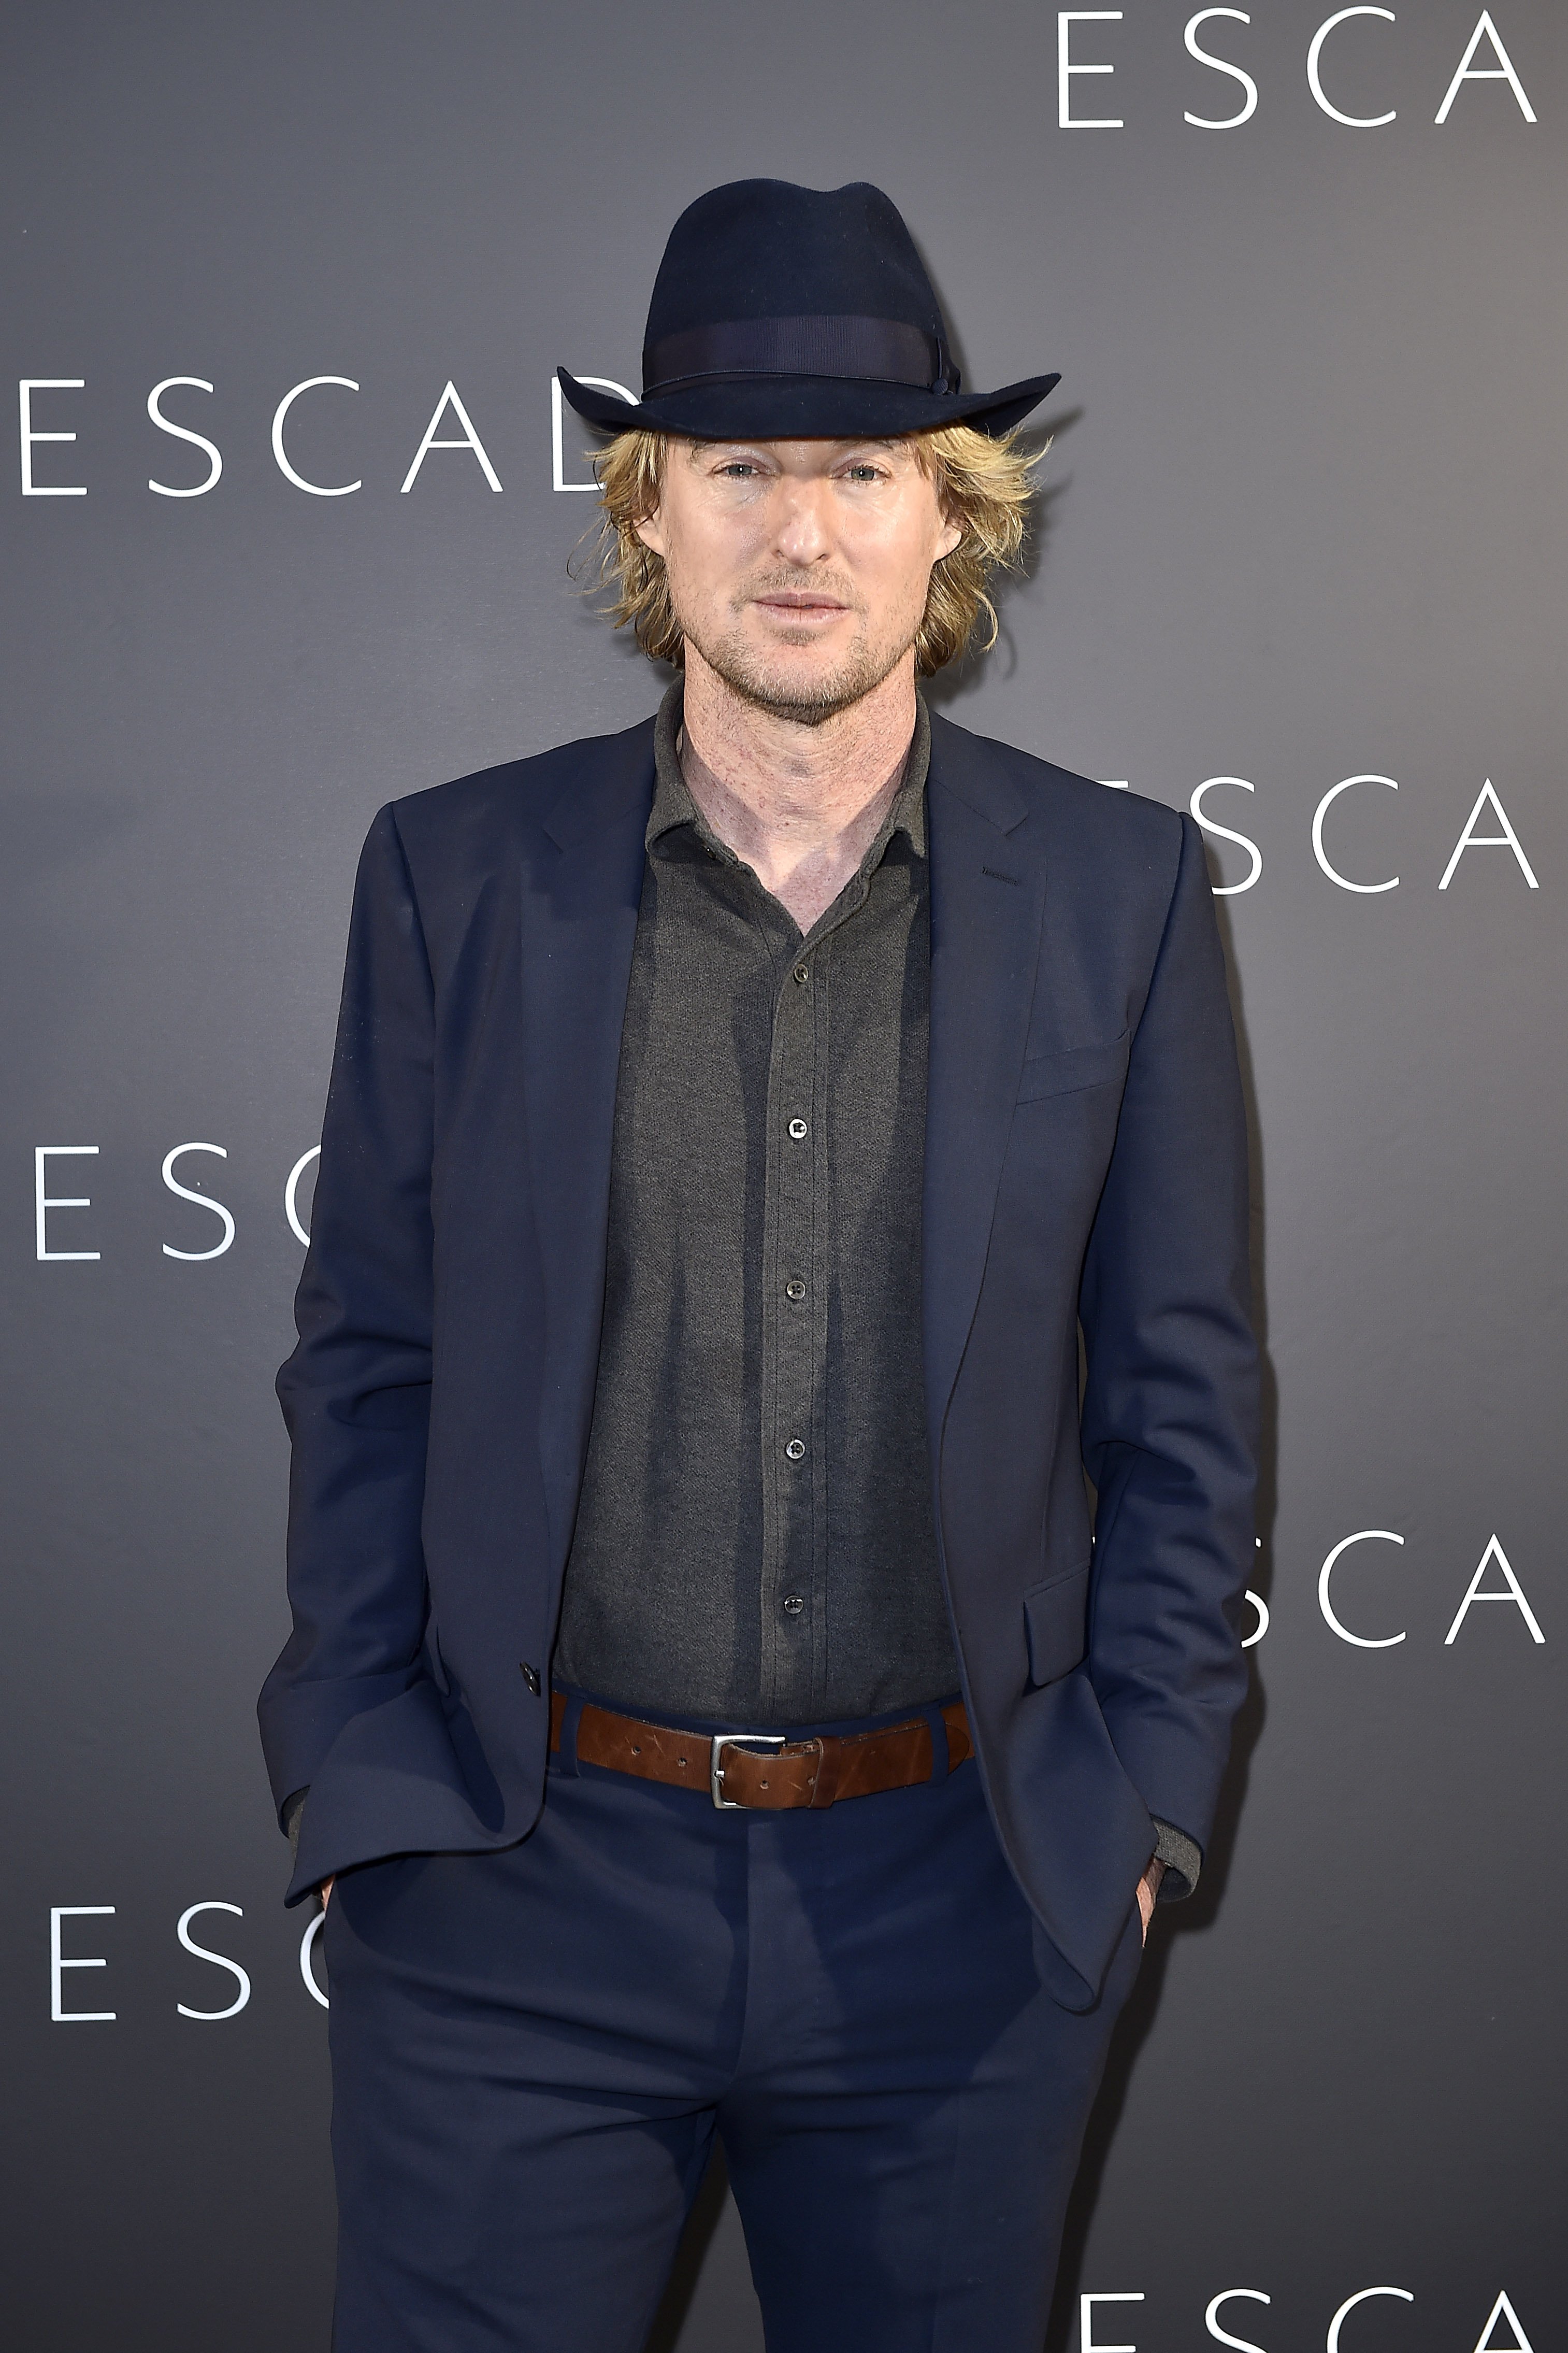 Owen Wilson attends the ESCADA Residency as part of the Paris Fashion Week Womenswear Fall/Winter 2019/2020 on February 27, 2019, in Paris, France. | Source: Getty Images